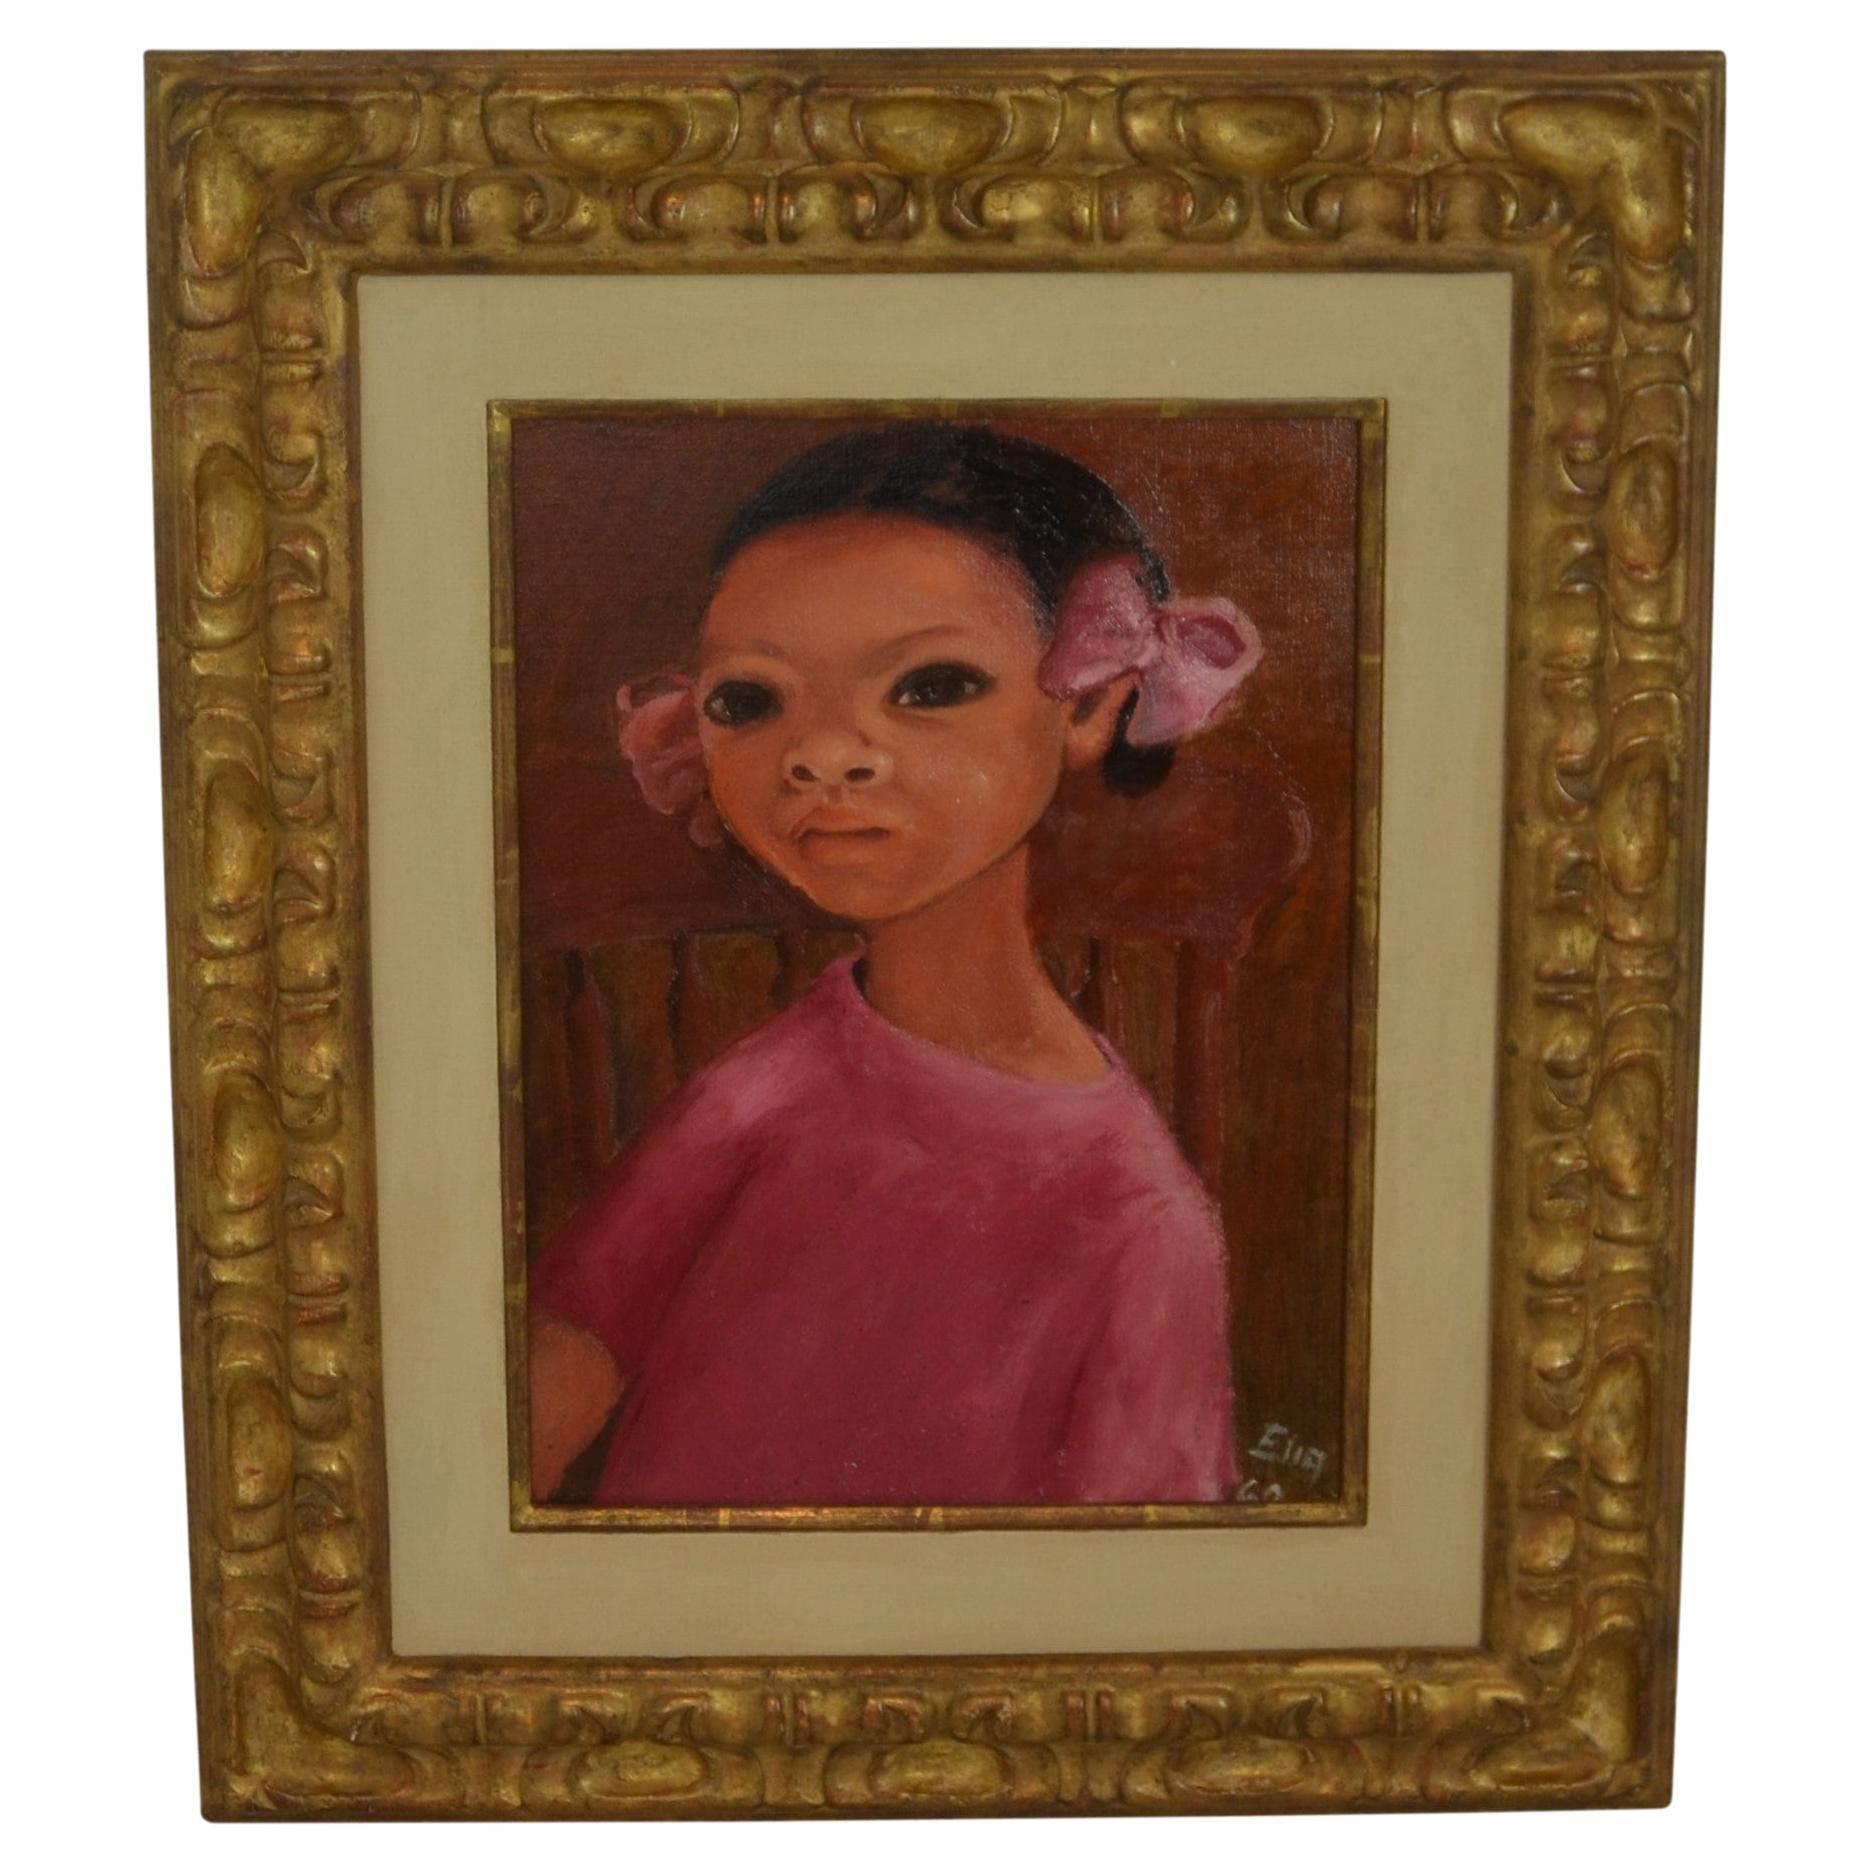 Oil painting portrait of a young girl. The frame is a carved wood gilded finish. Signed and dated 1960 on the bottom right corner.
   